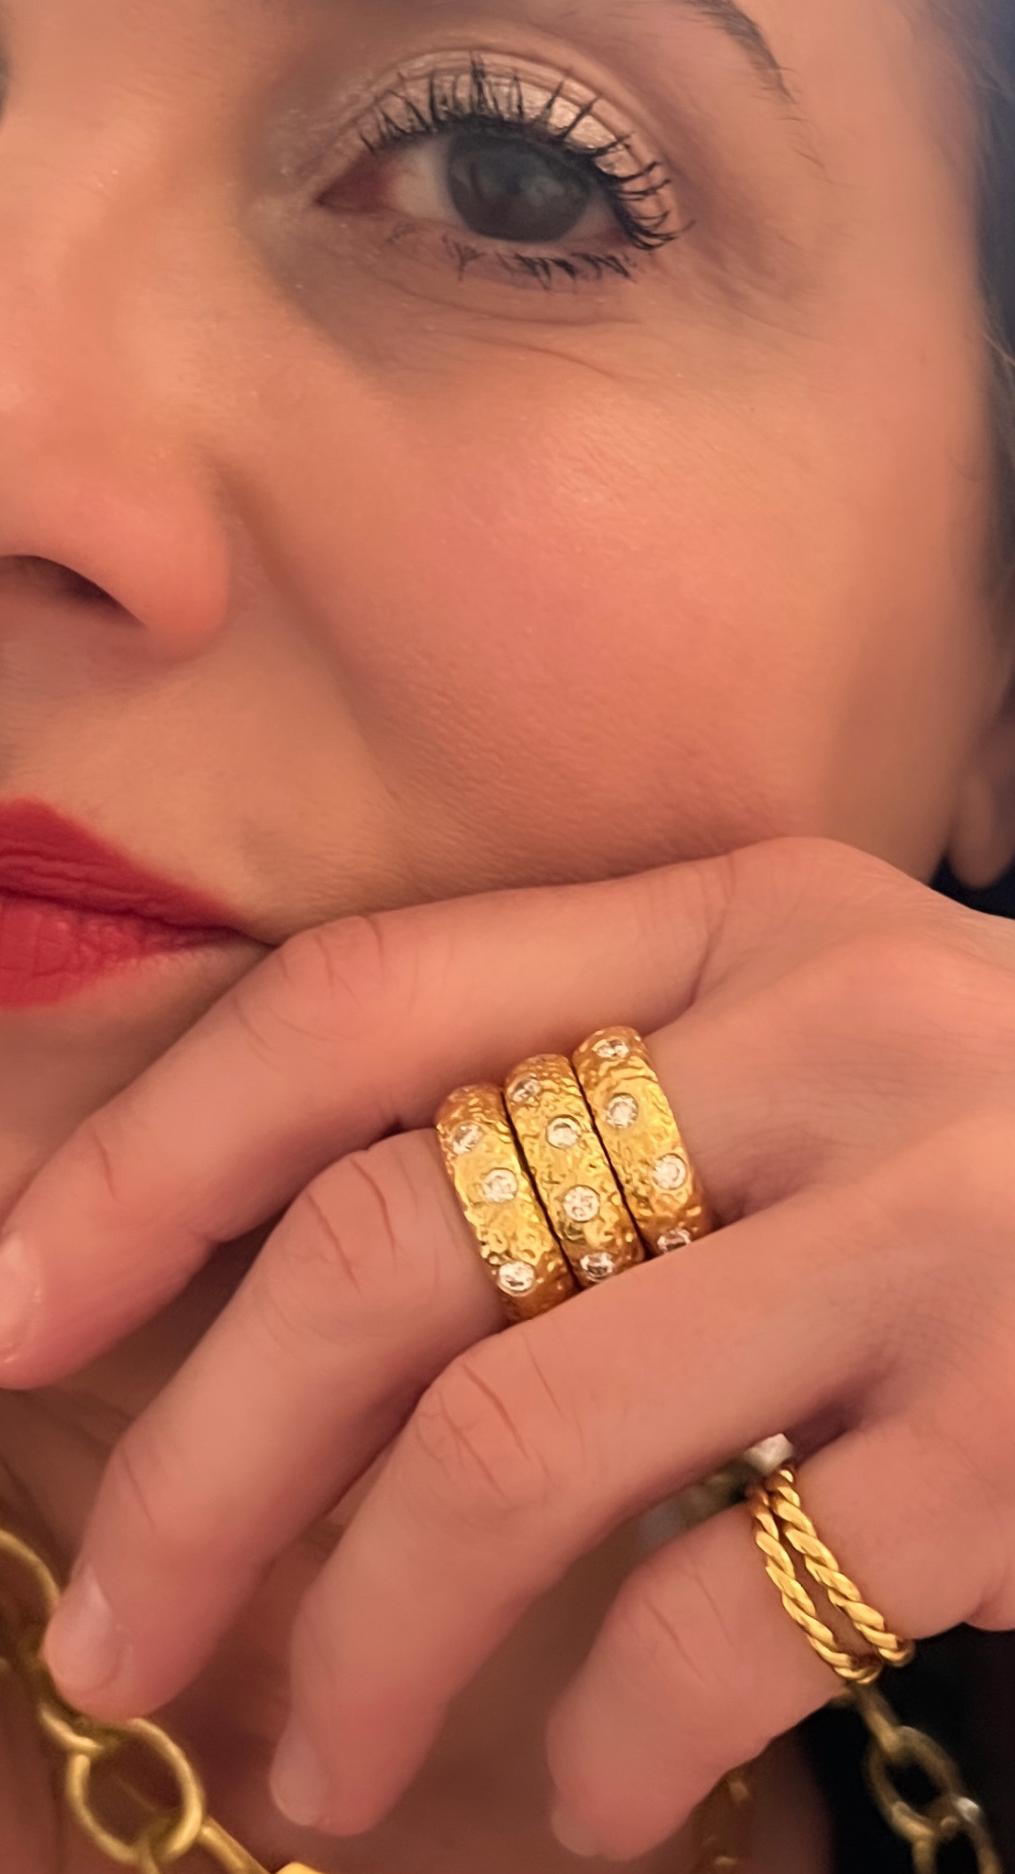 22k gold hand hammered, hand textured stacking rings are perfect with the added touch of diamonds!. Take your look to the next level with these 22k gold thick diamond stacking rings. They are perfect alone or stack with others like it or pair with